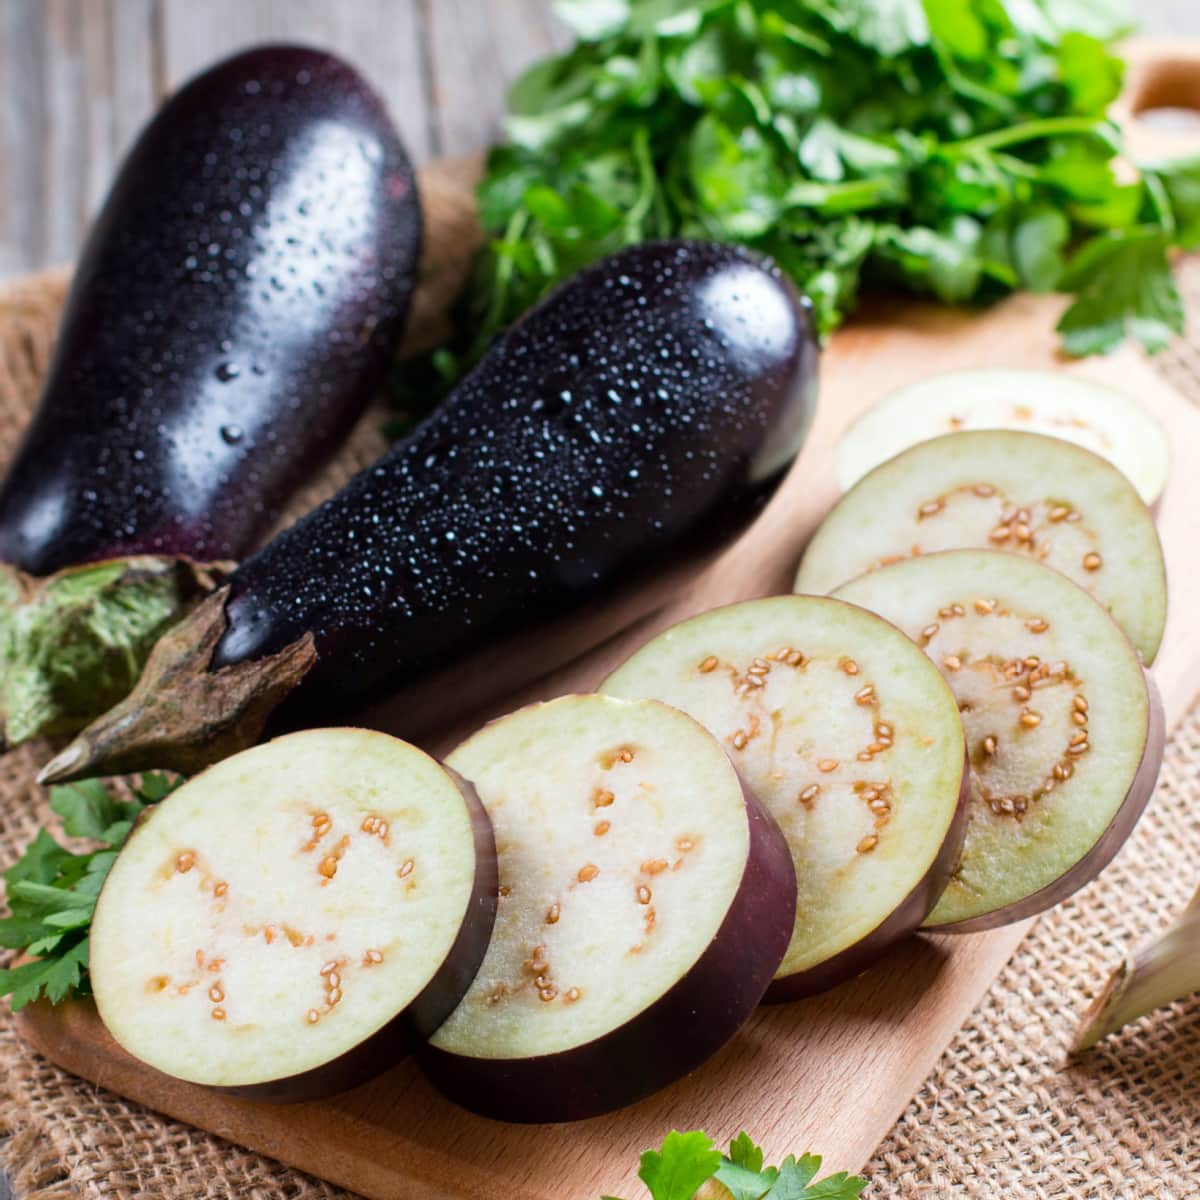 Whole and Slice Eggplant on a Wooden Cutting Board